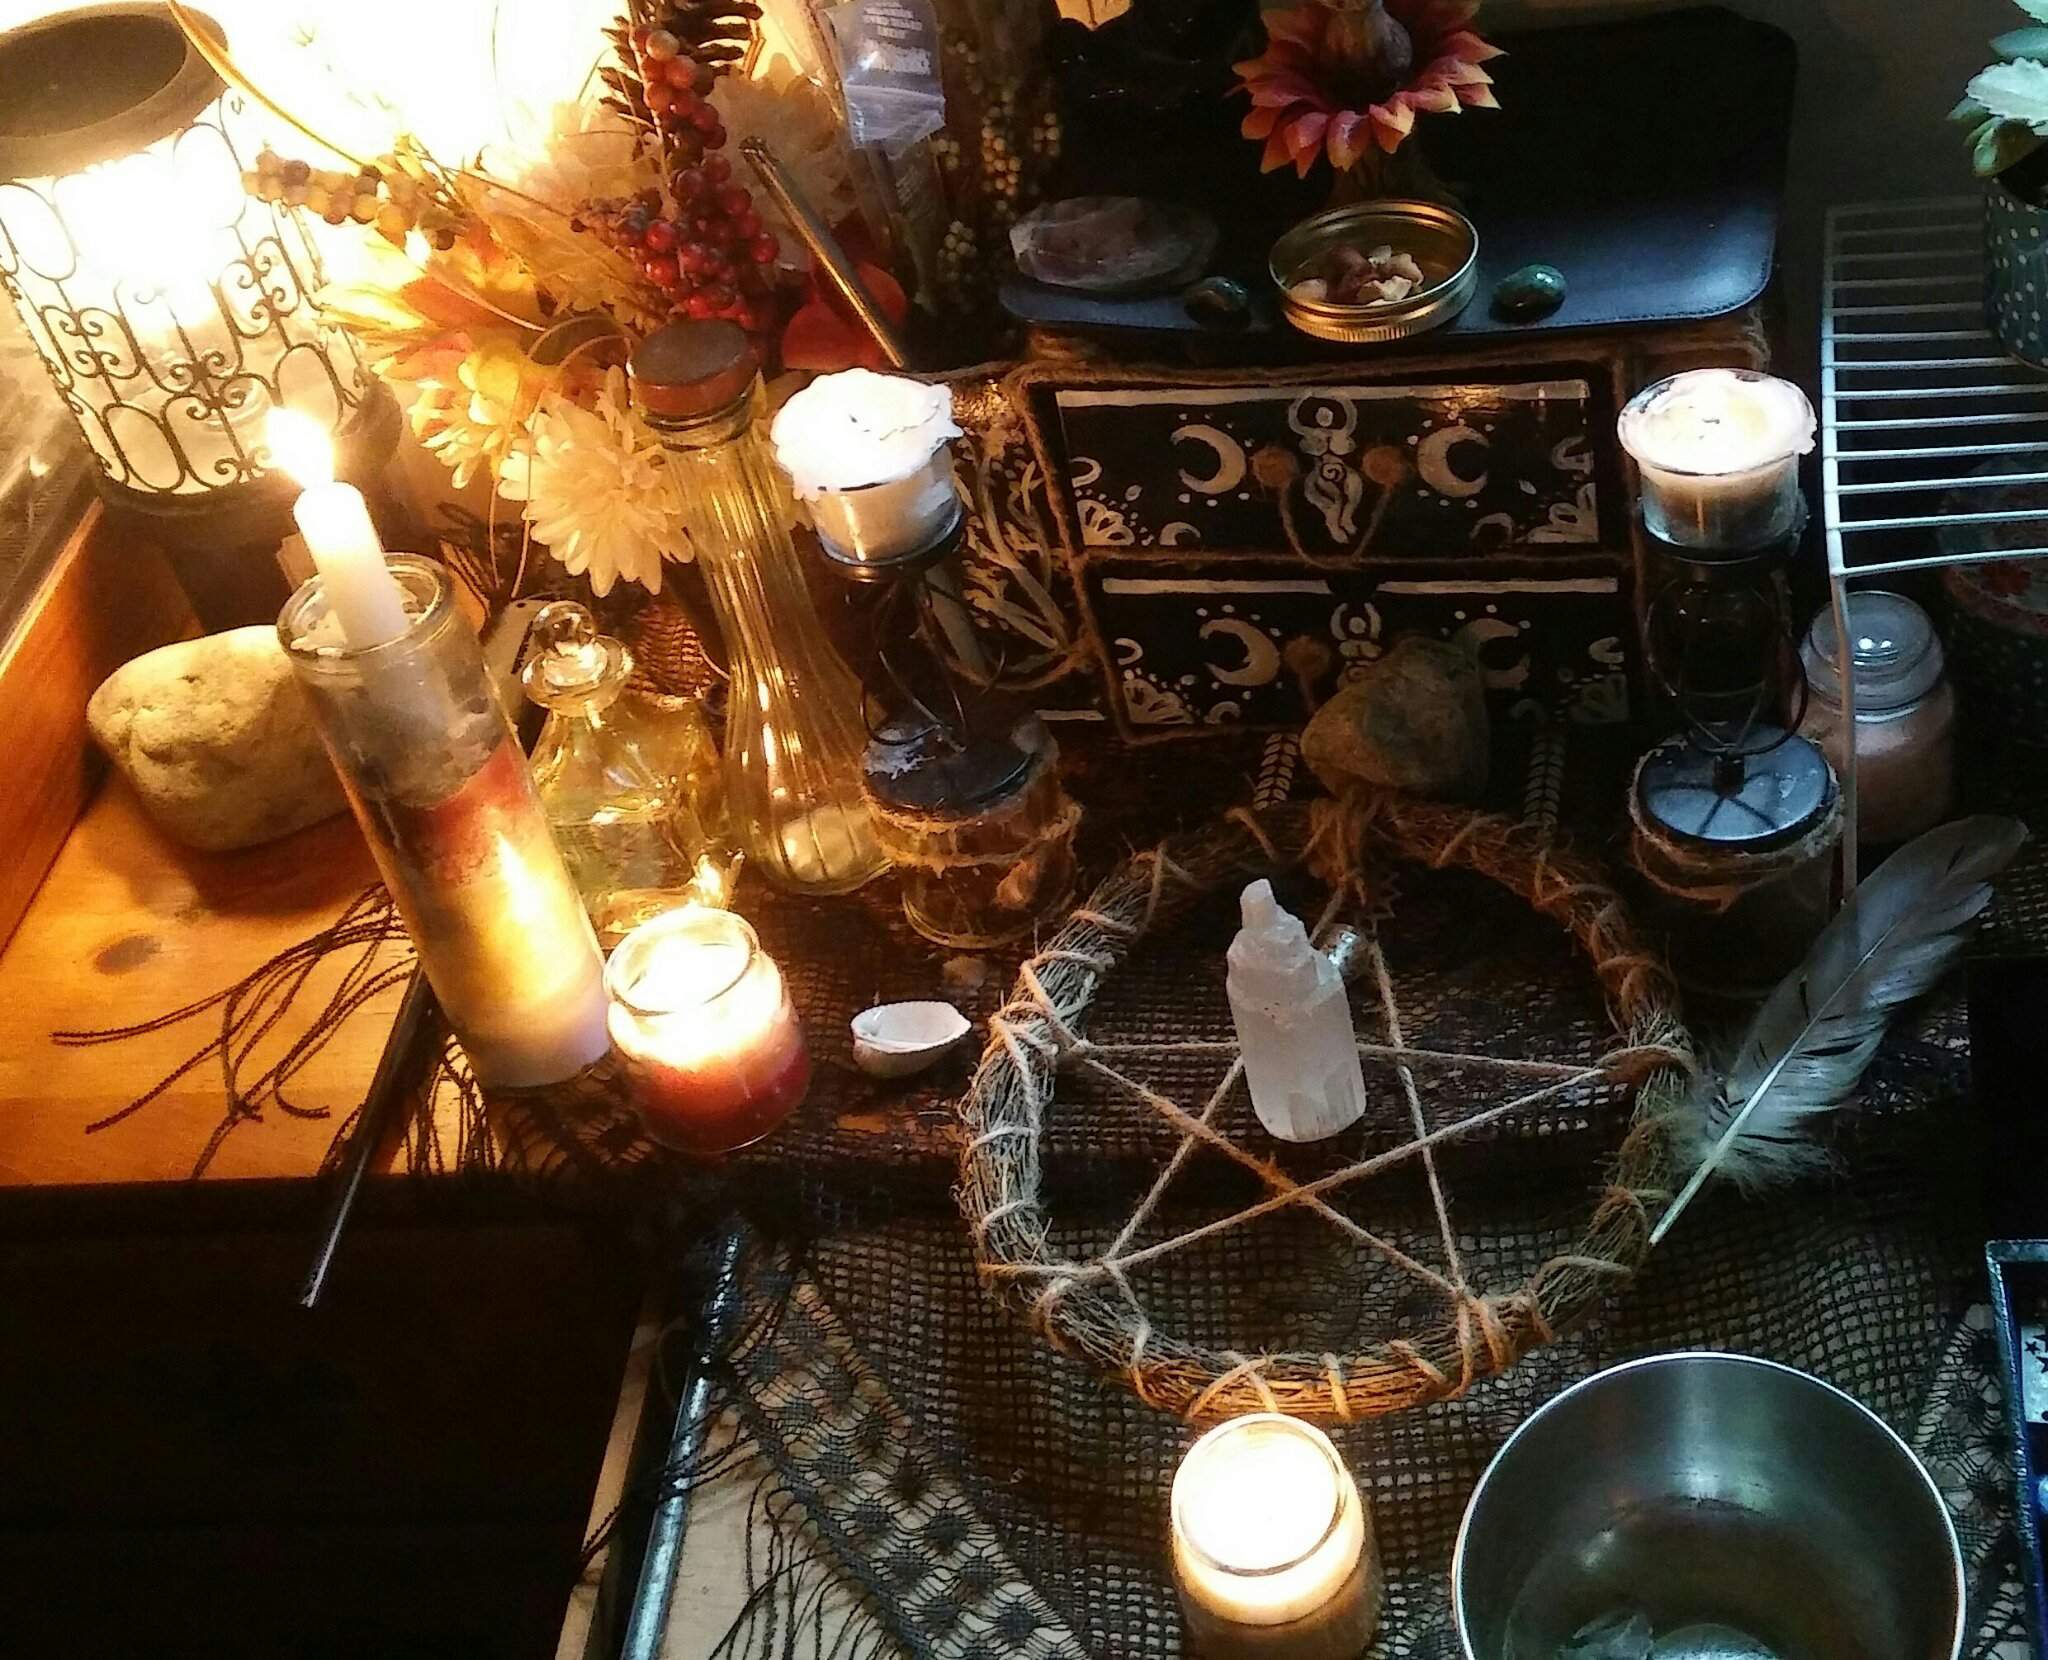 #ShowYourAltar #OWC Eclectic Witch: My altar + space | Pagans & Witches ...